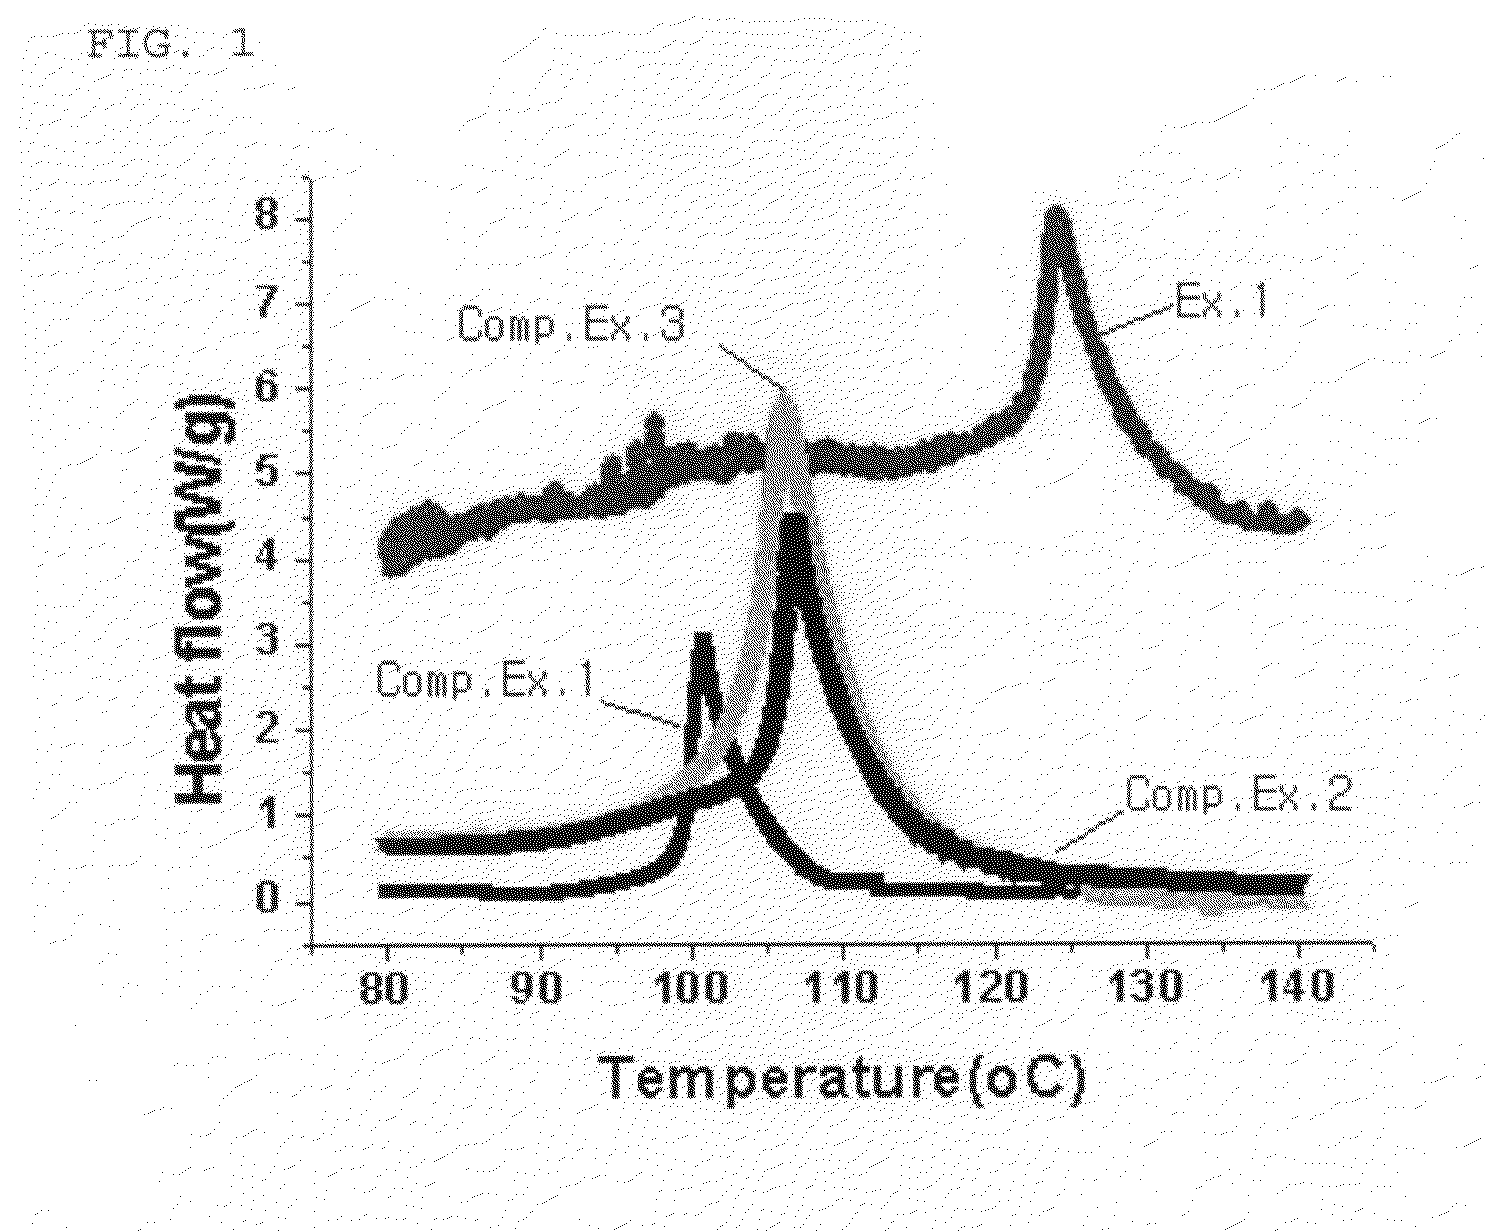 Additive for non-aqueous electrolyte and secondary battery using the same